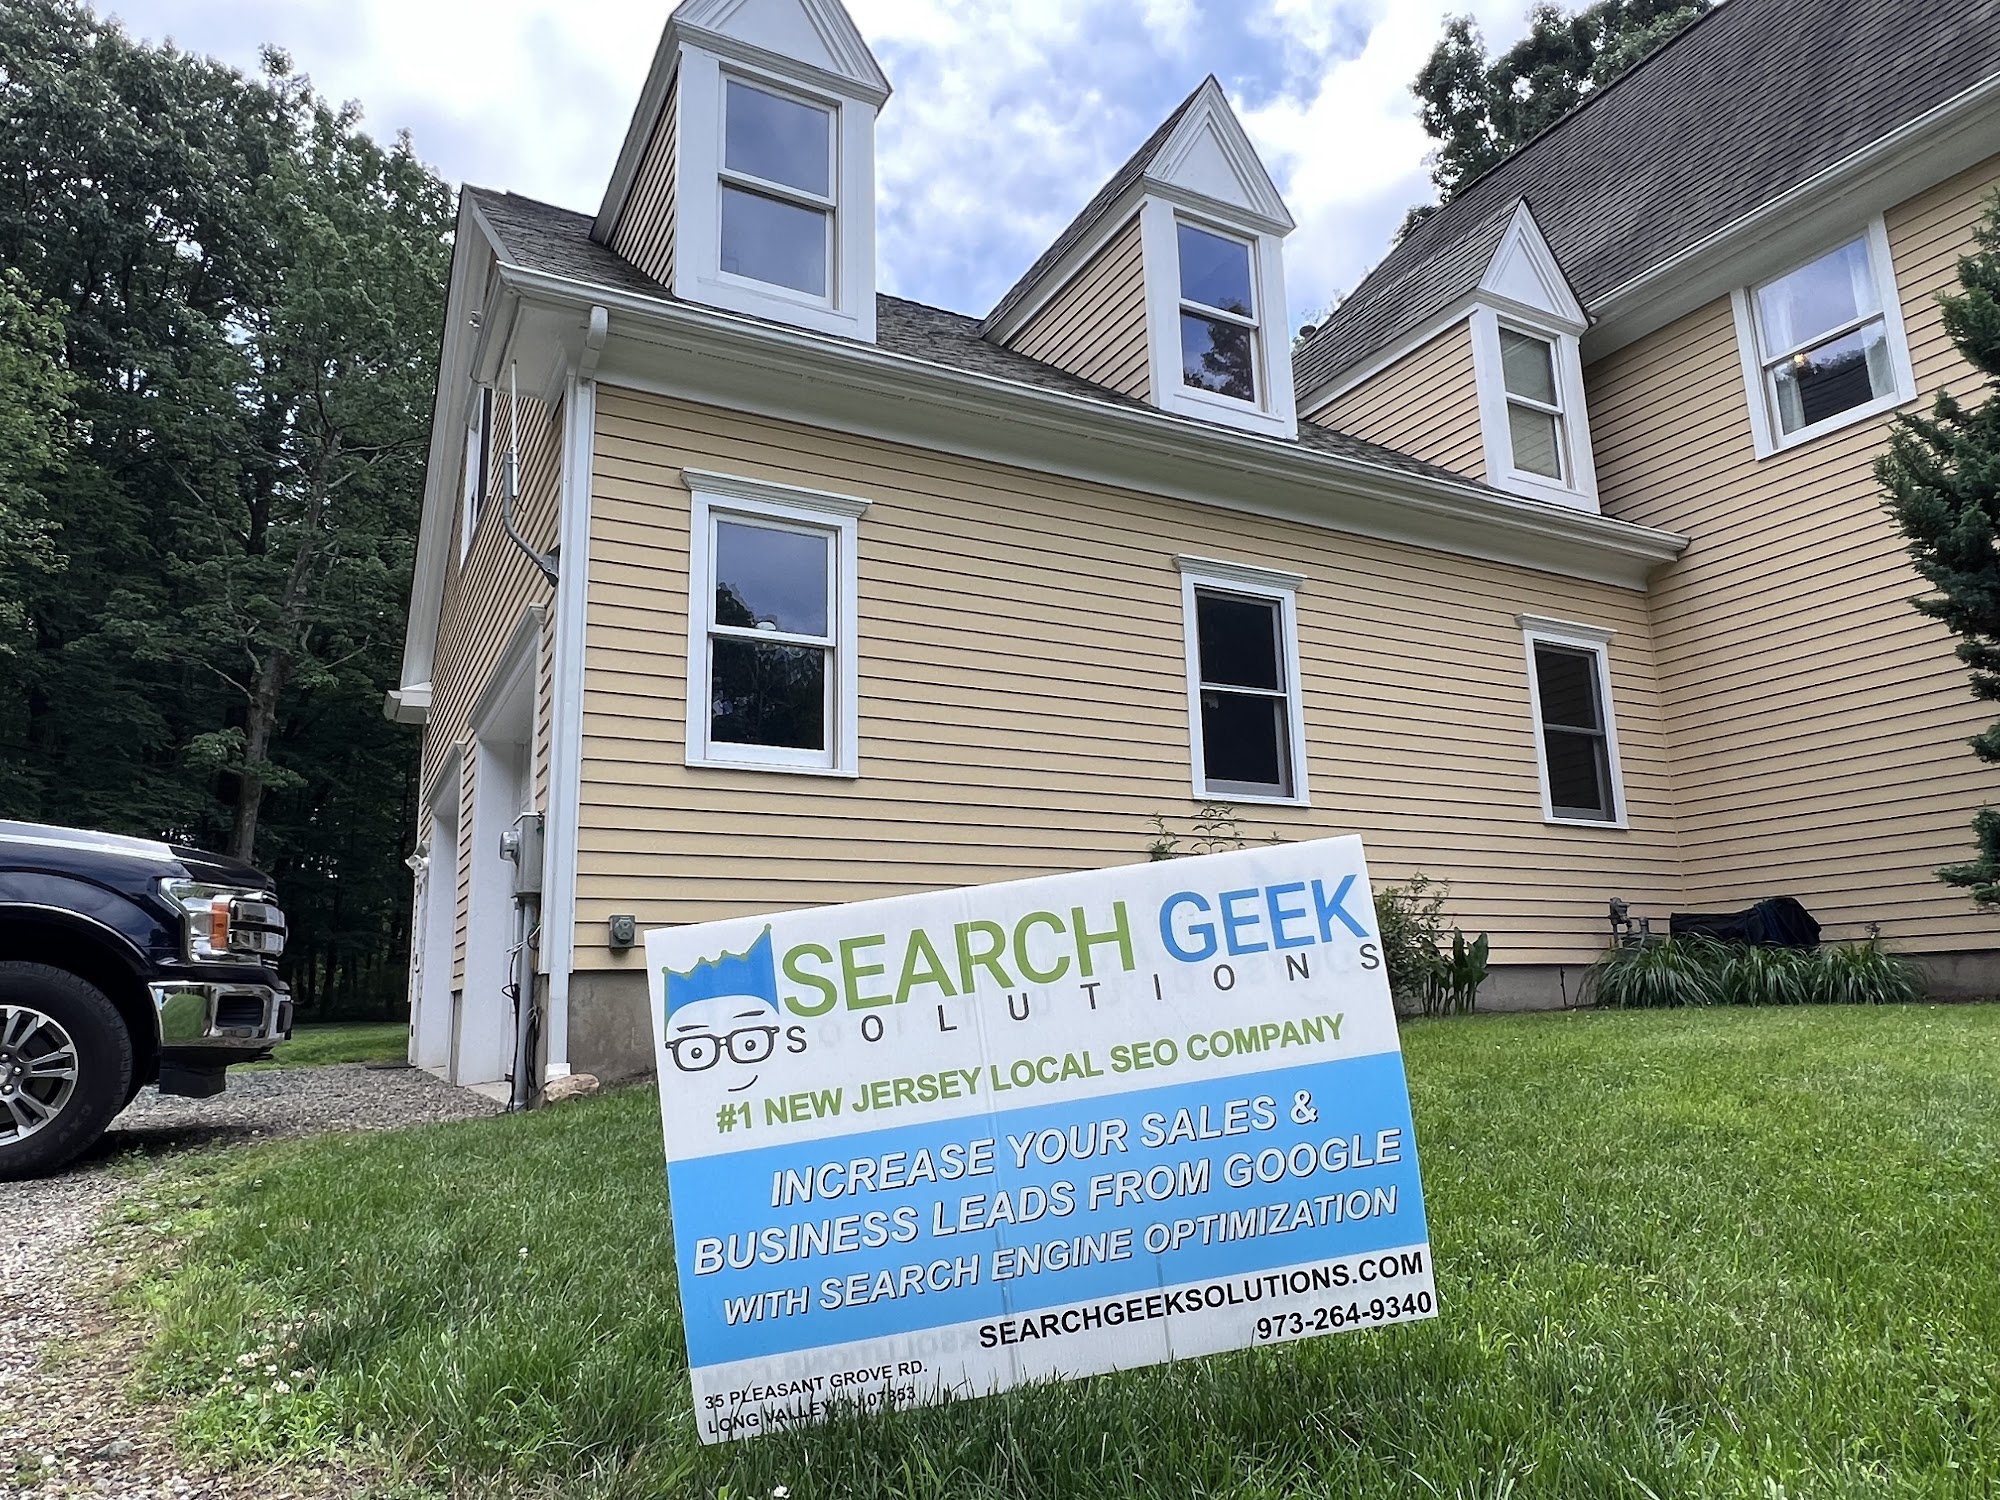 Search Geek Solutions 35 Pleasant Grove Rd, Long Valley New Jersey 07853